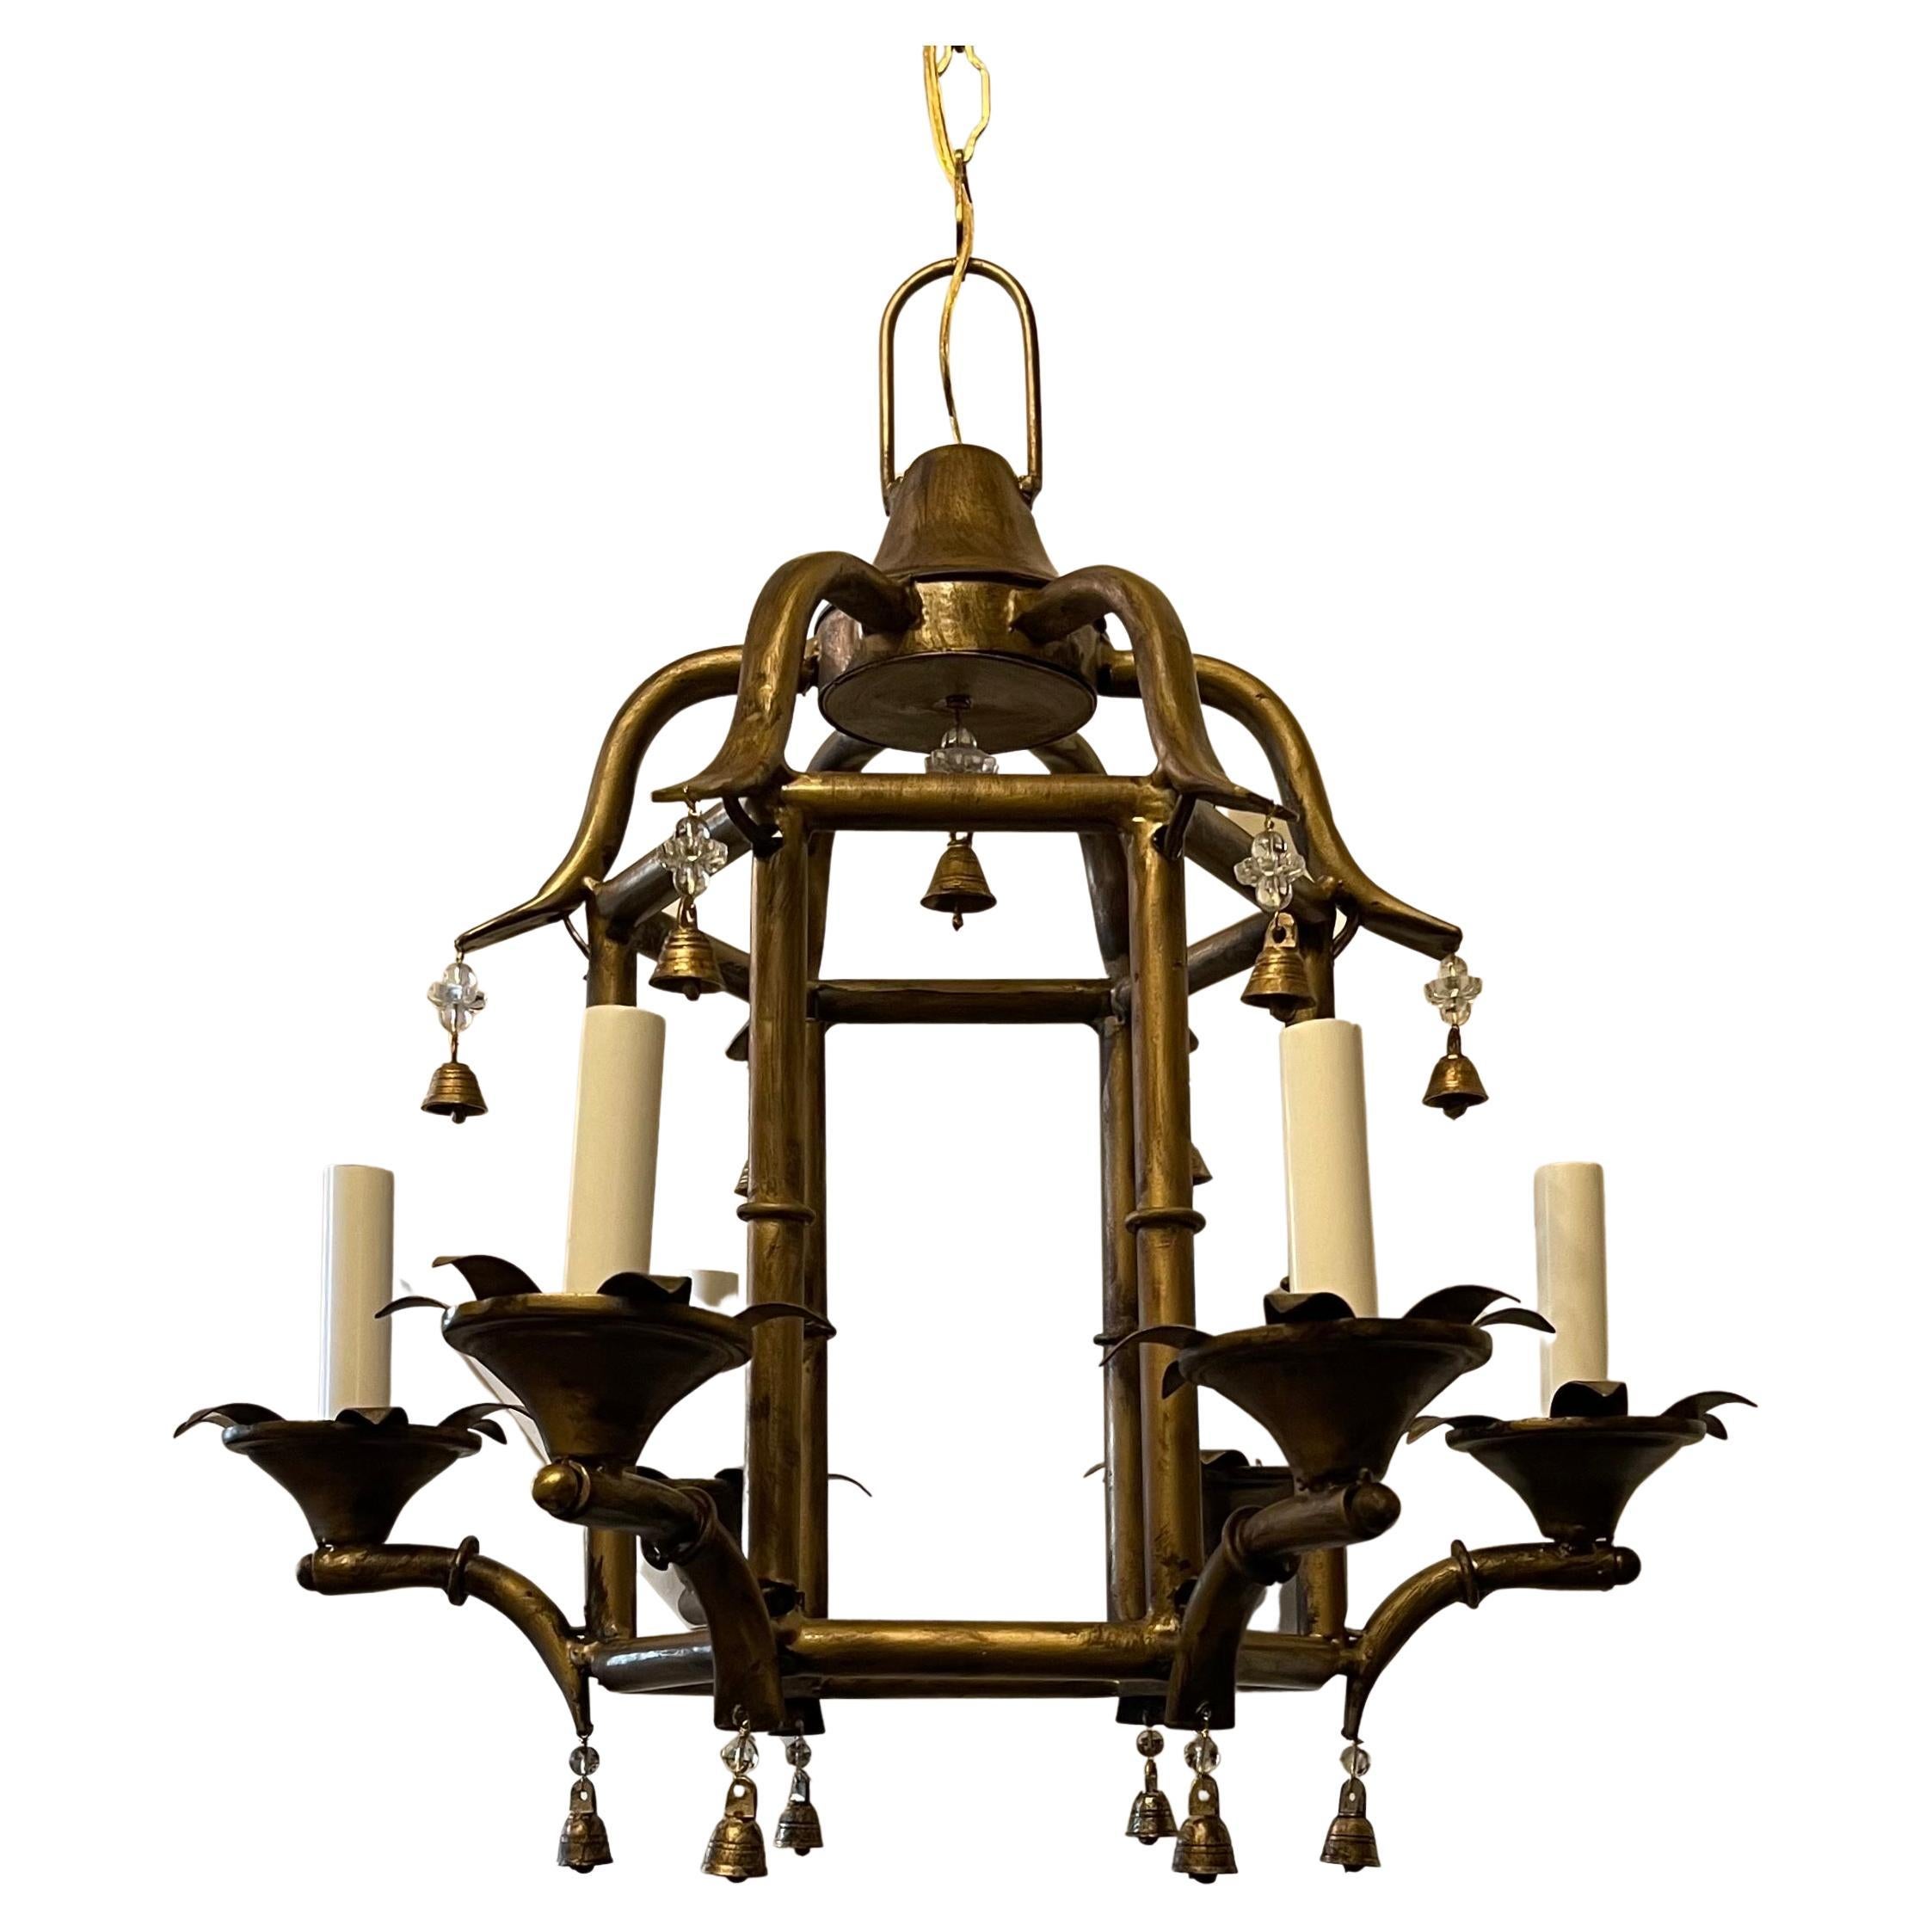 A Wonderful Gold Gilt Tole Pagoda Bamboo Form chinoiserie Lantern Fixture With 6 Candelabra Lights And This Beautiful Chandelier Is Decorated With Crystal Beads And Flowers Finished With Brass Bells.